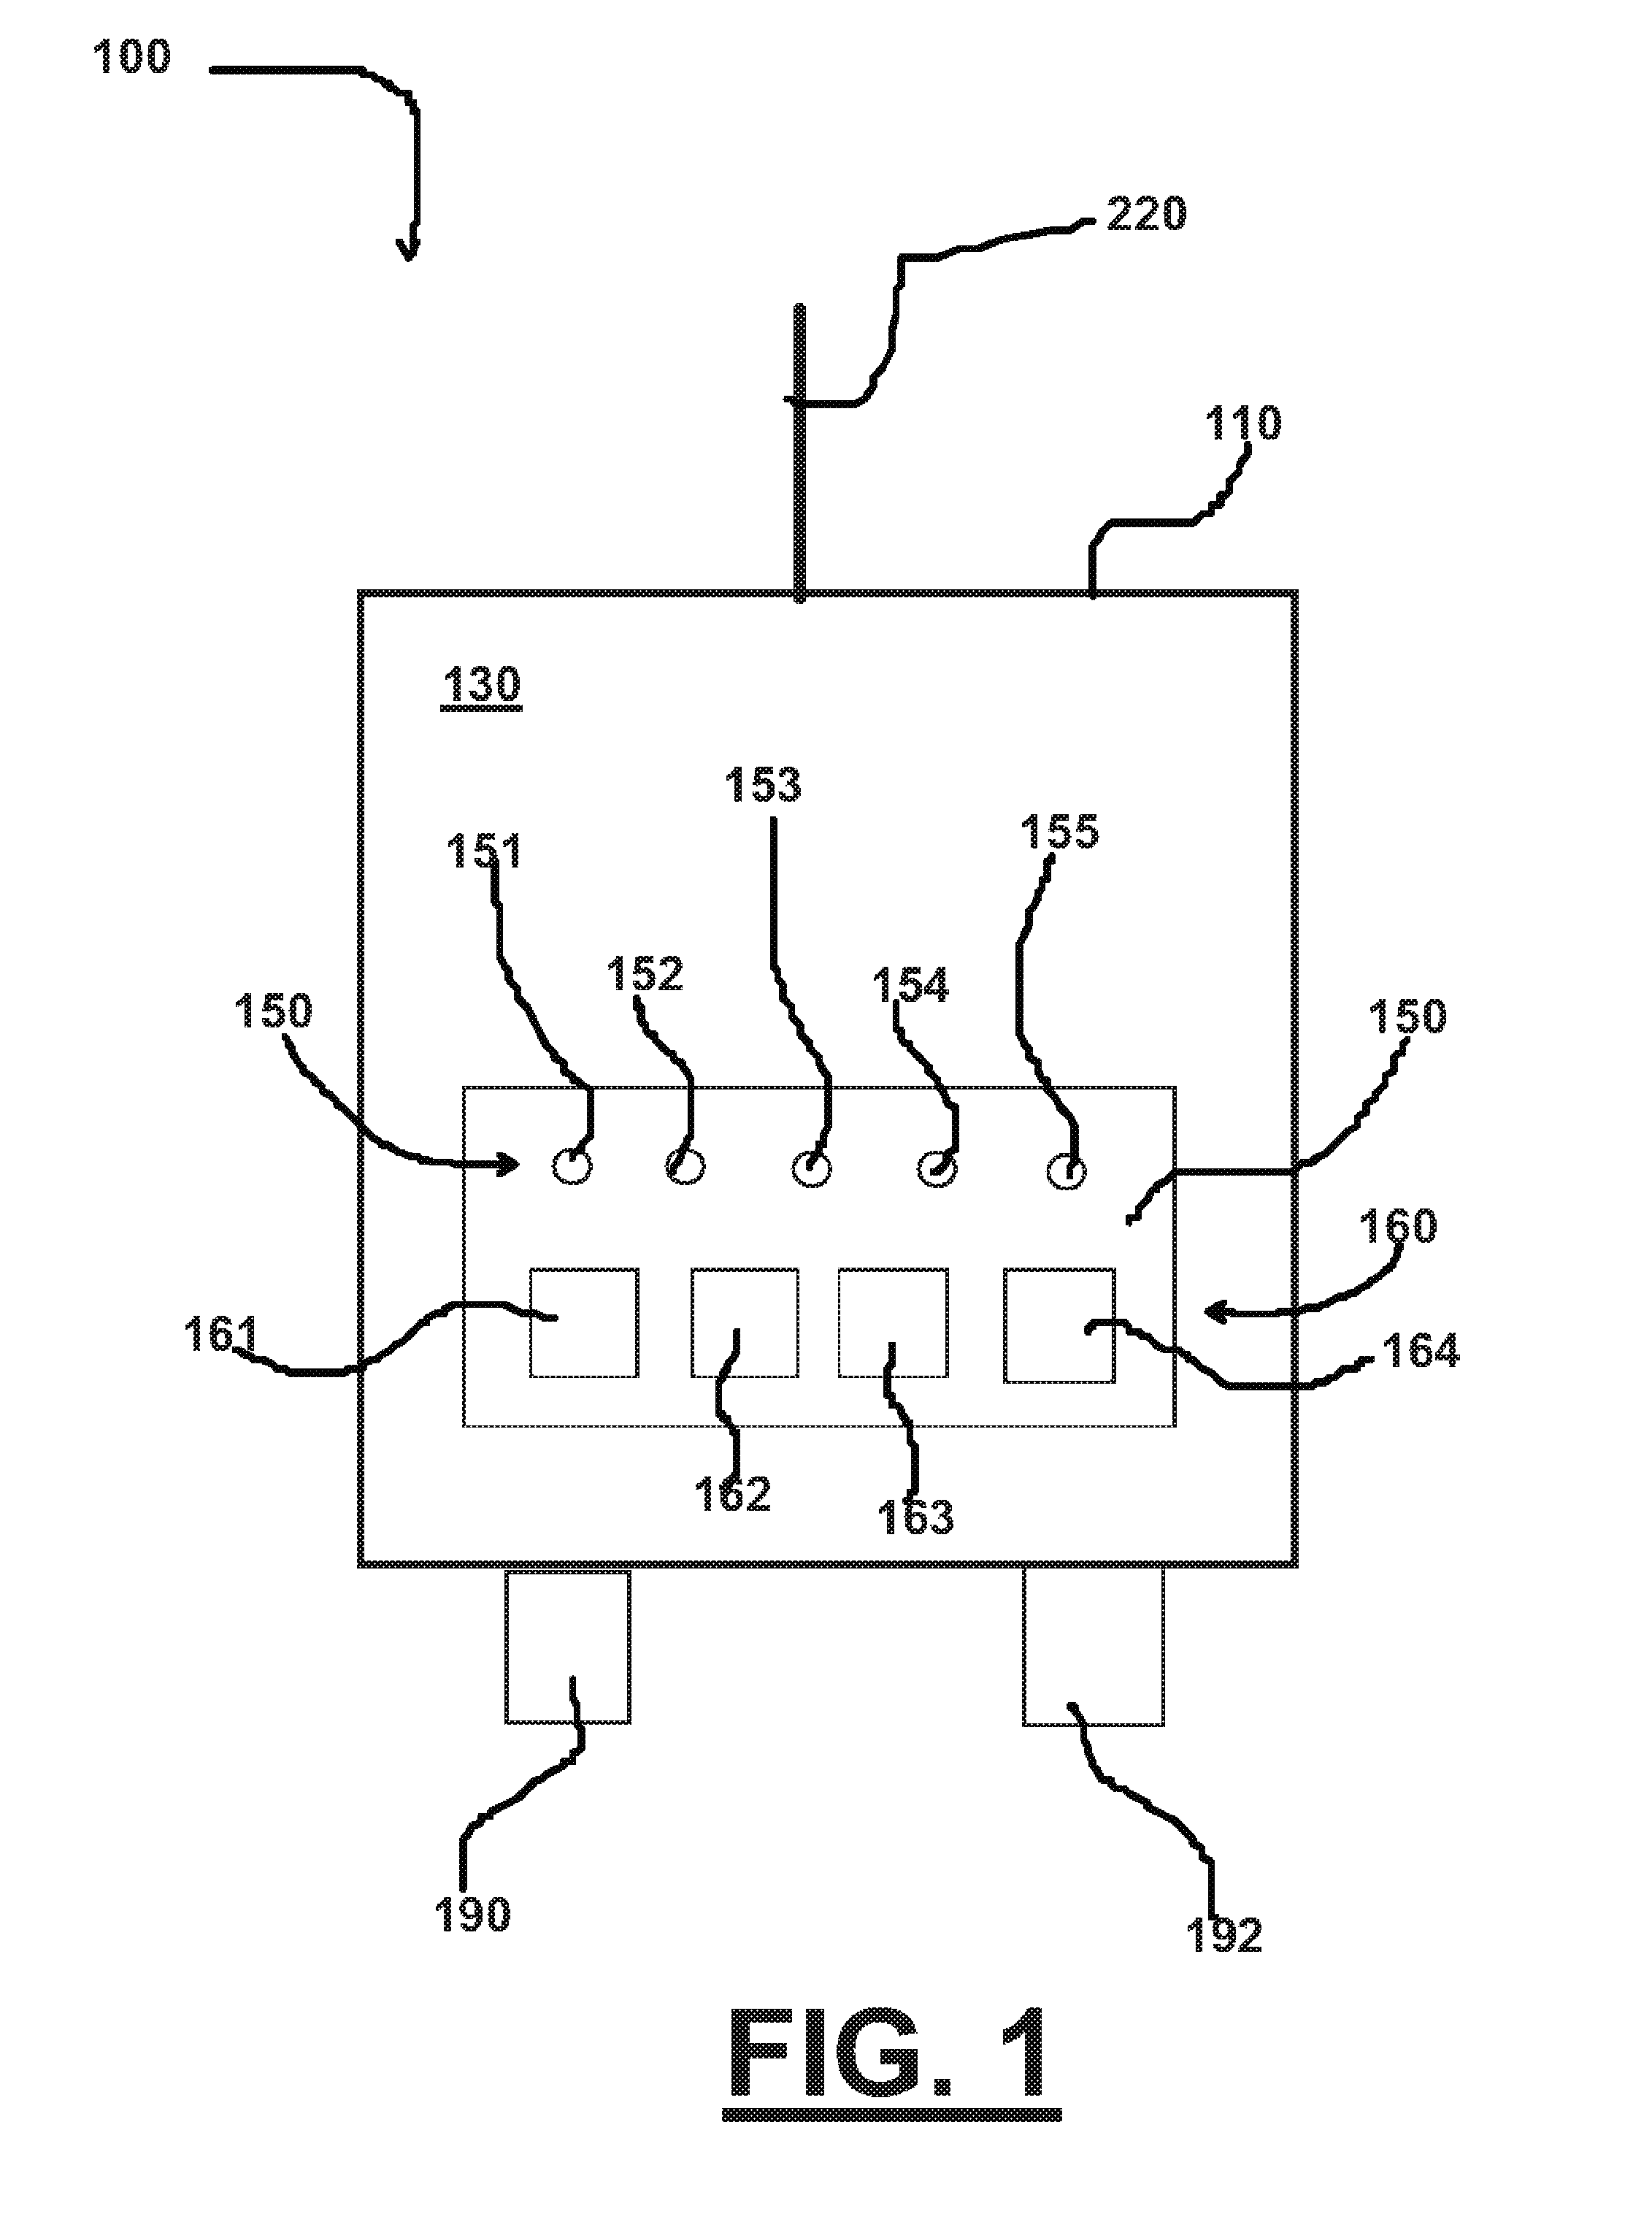 Method and Apparatus for Detecting Leaks in a Building Water System